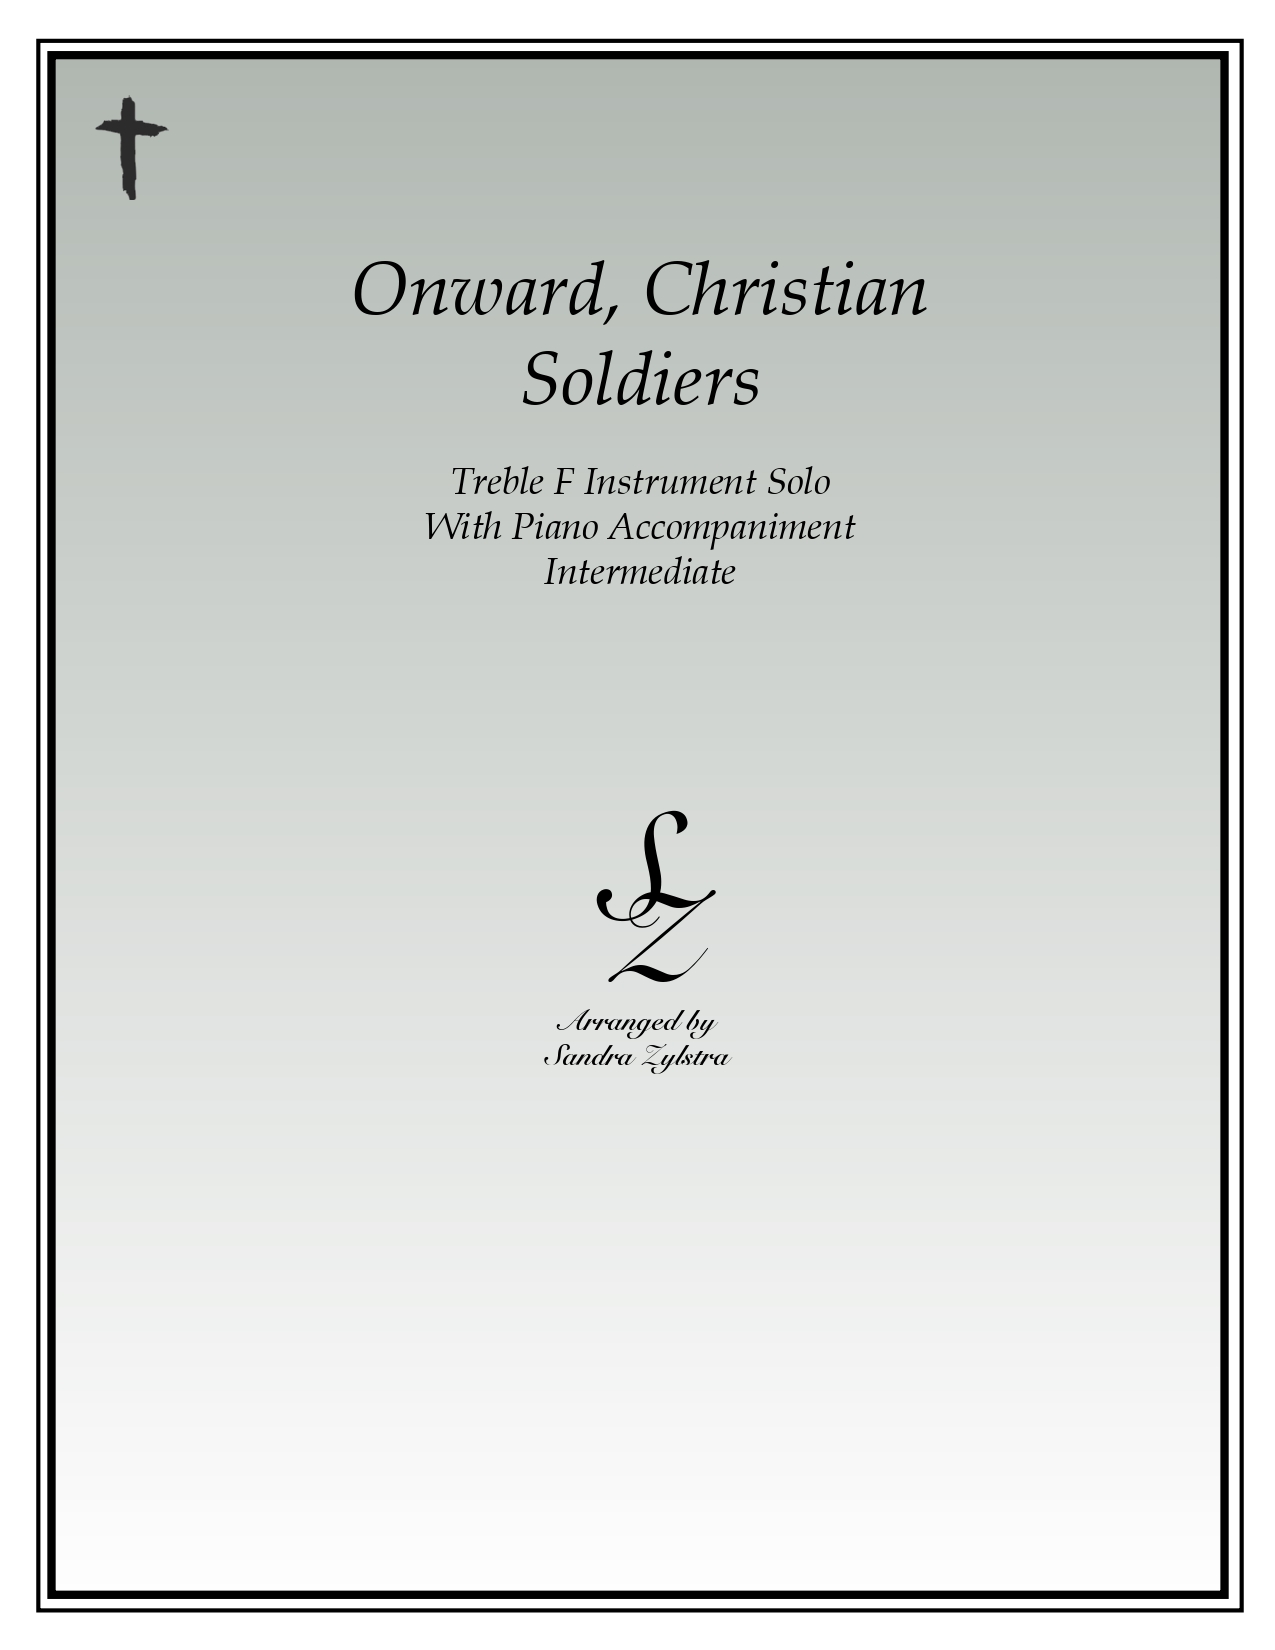 Onward Christian Soldiers F instrument solo part cover page 00011